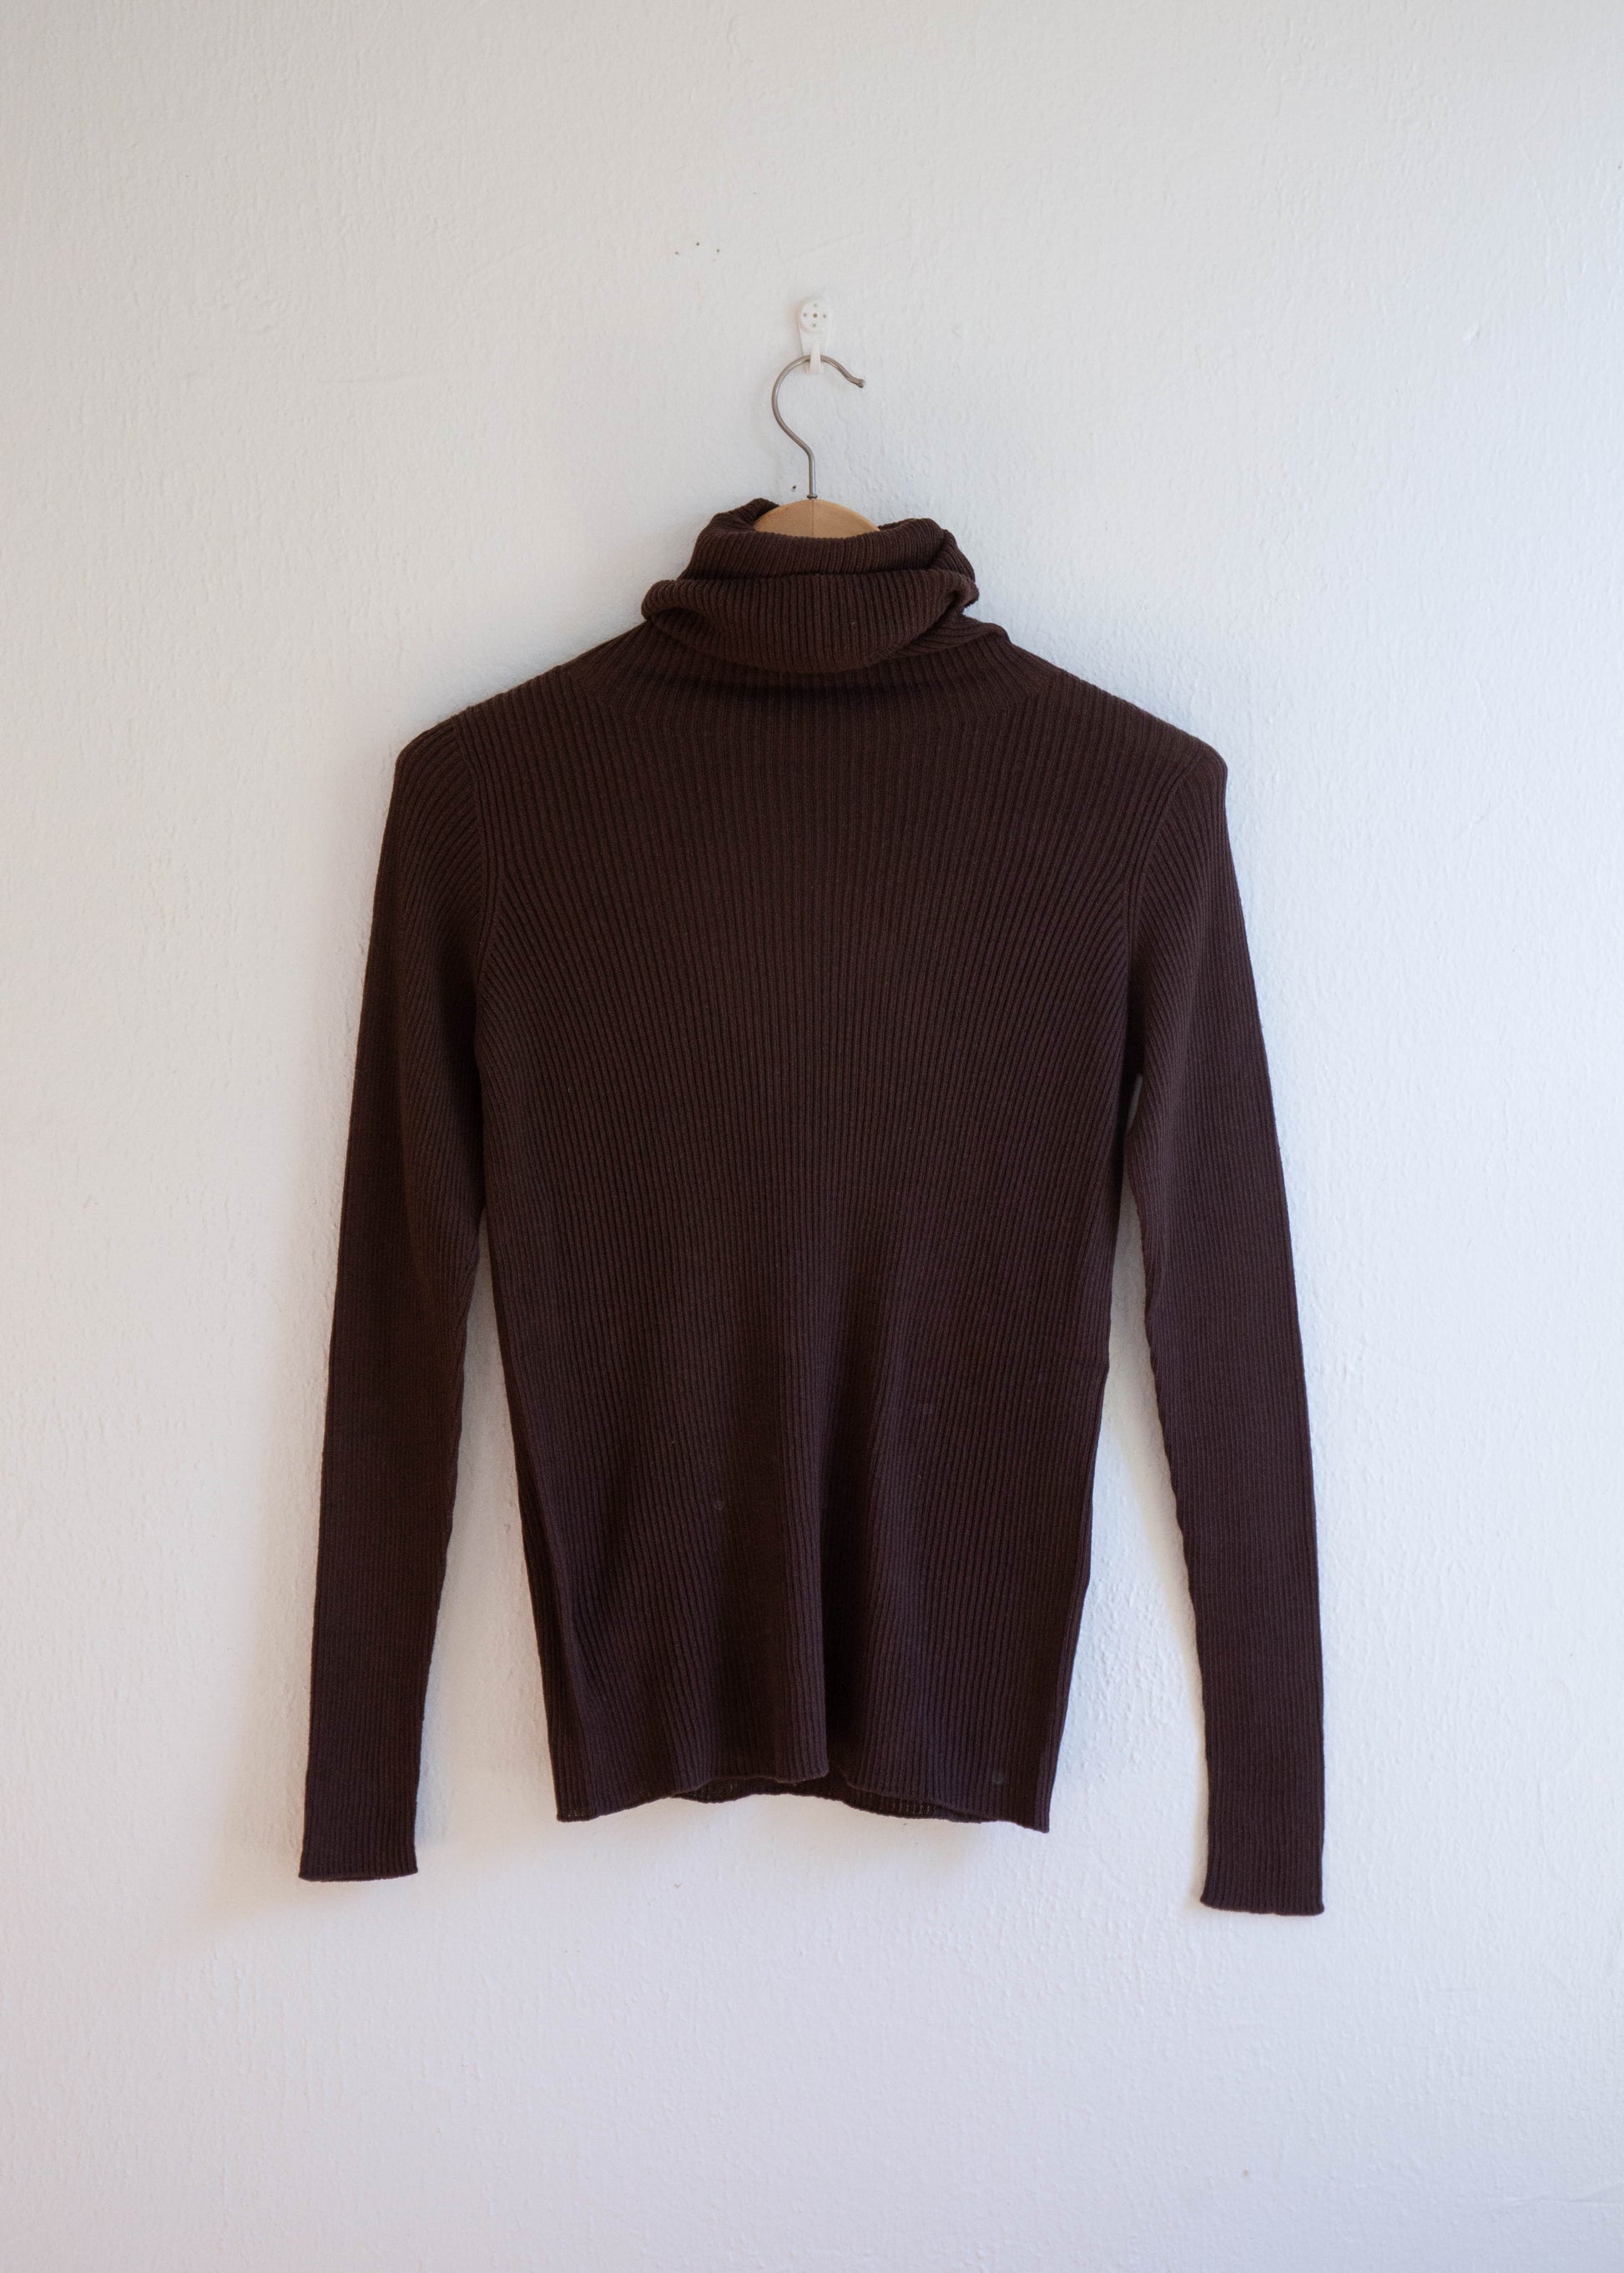 Whole garment rib turtleneck pullover color brown hanging on white wall